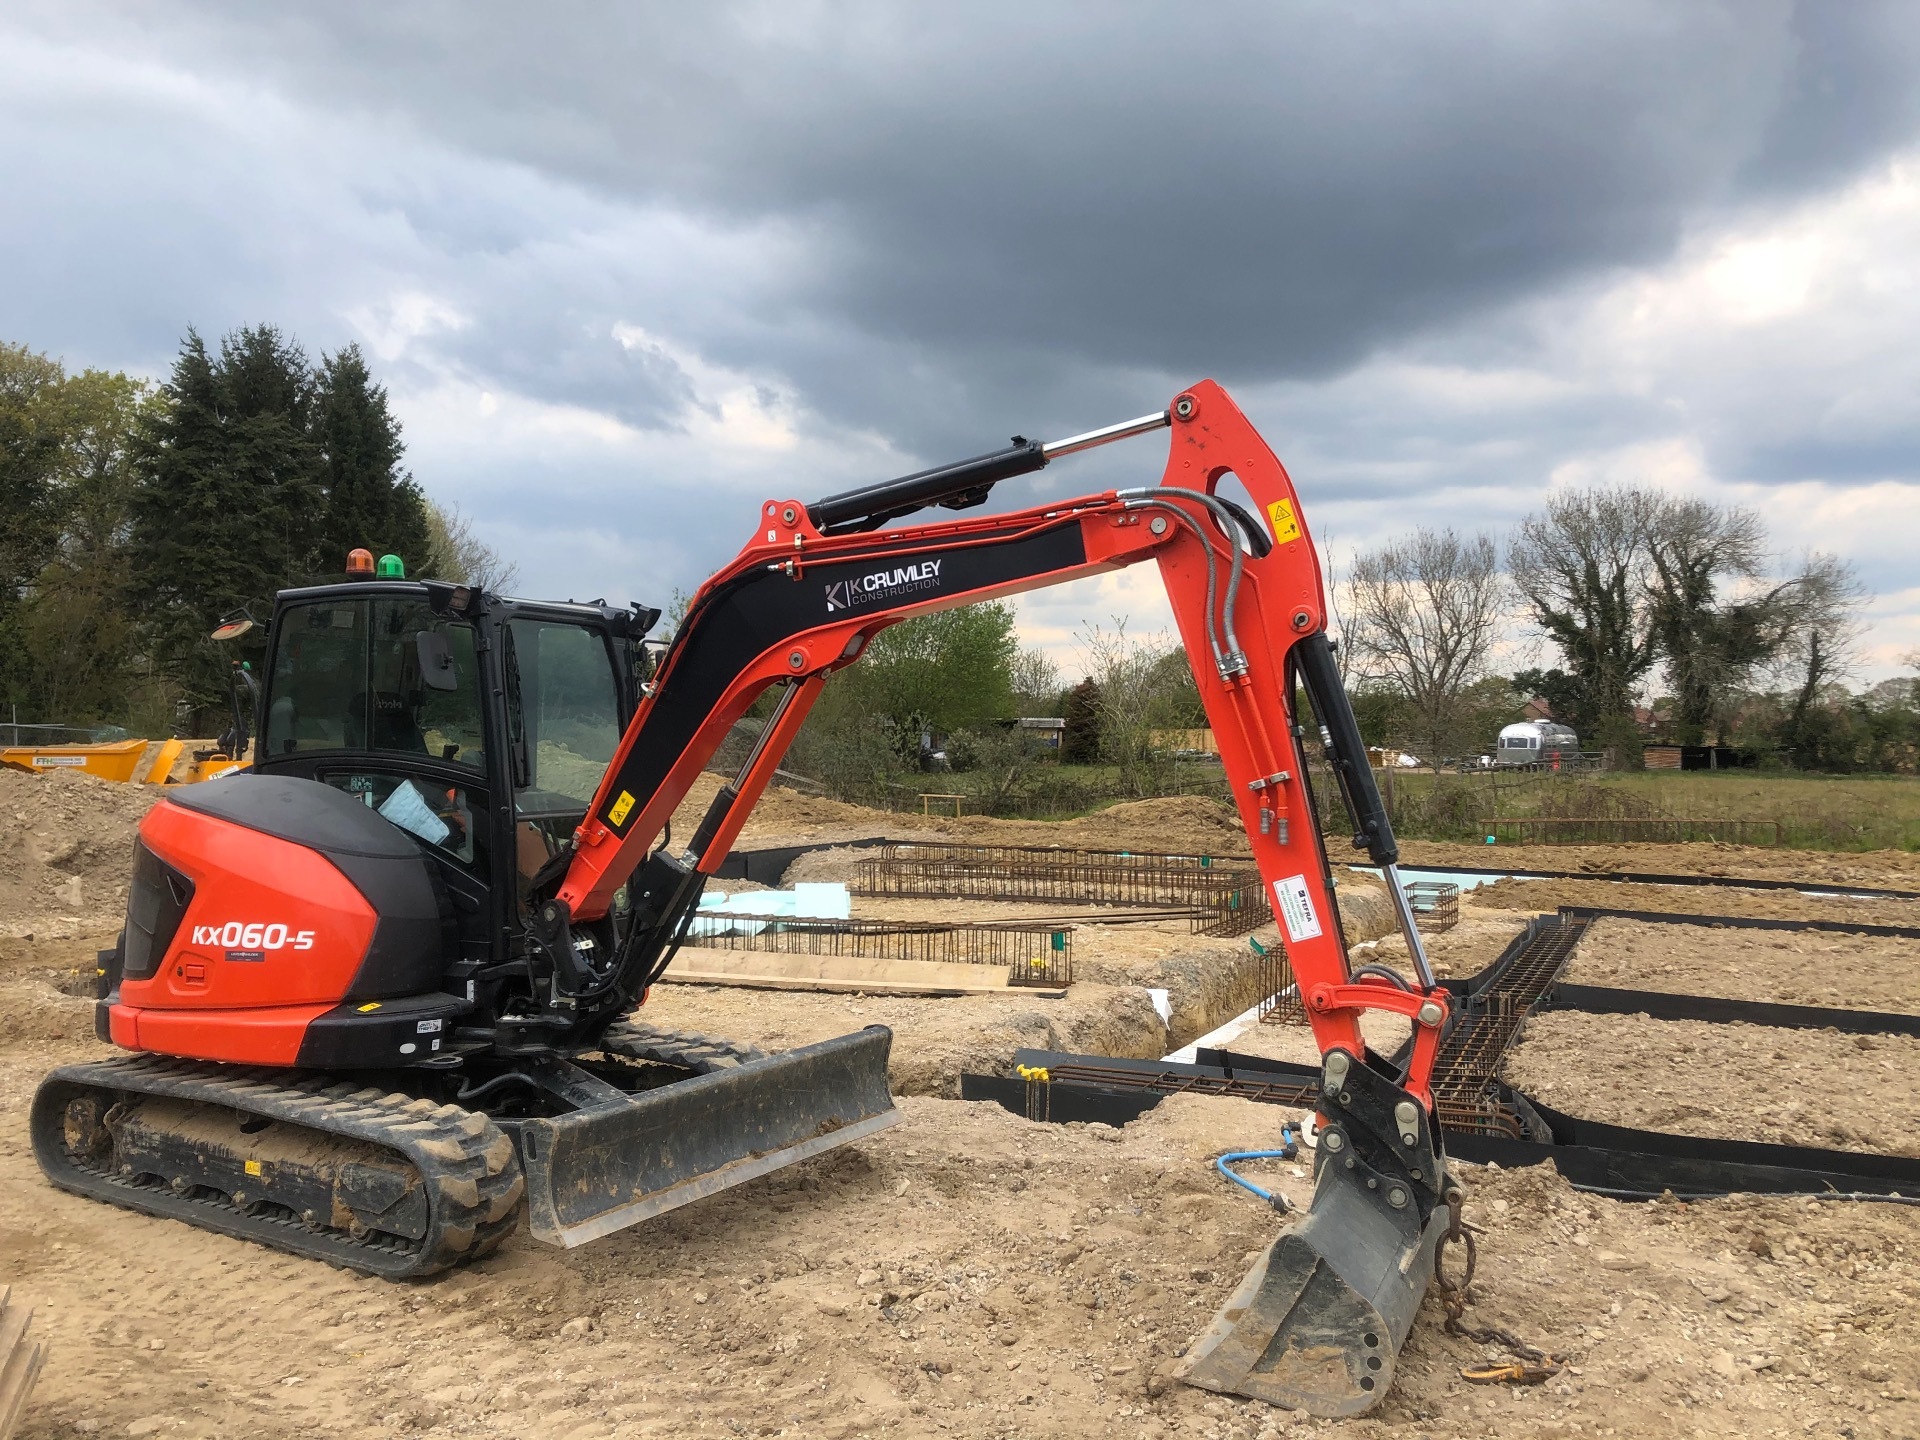 One of K Crumley Construction's diggers hard at work on a groundworks project in west Sussex.